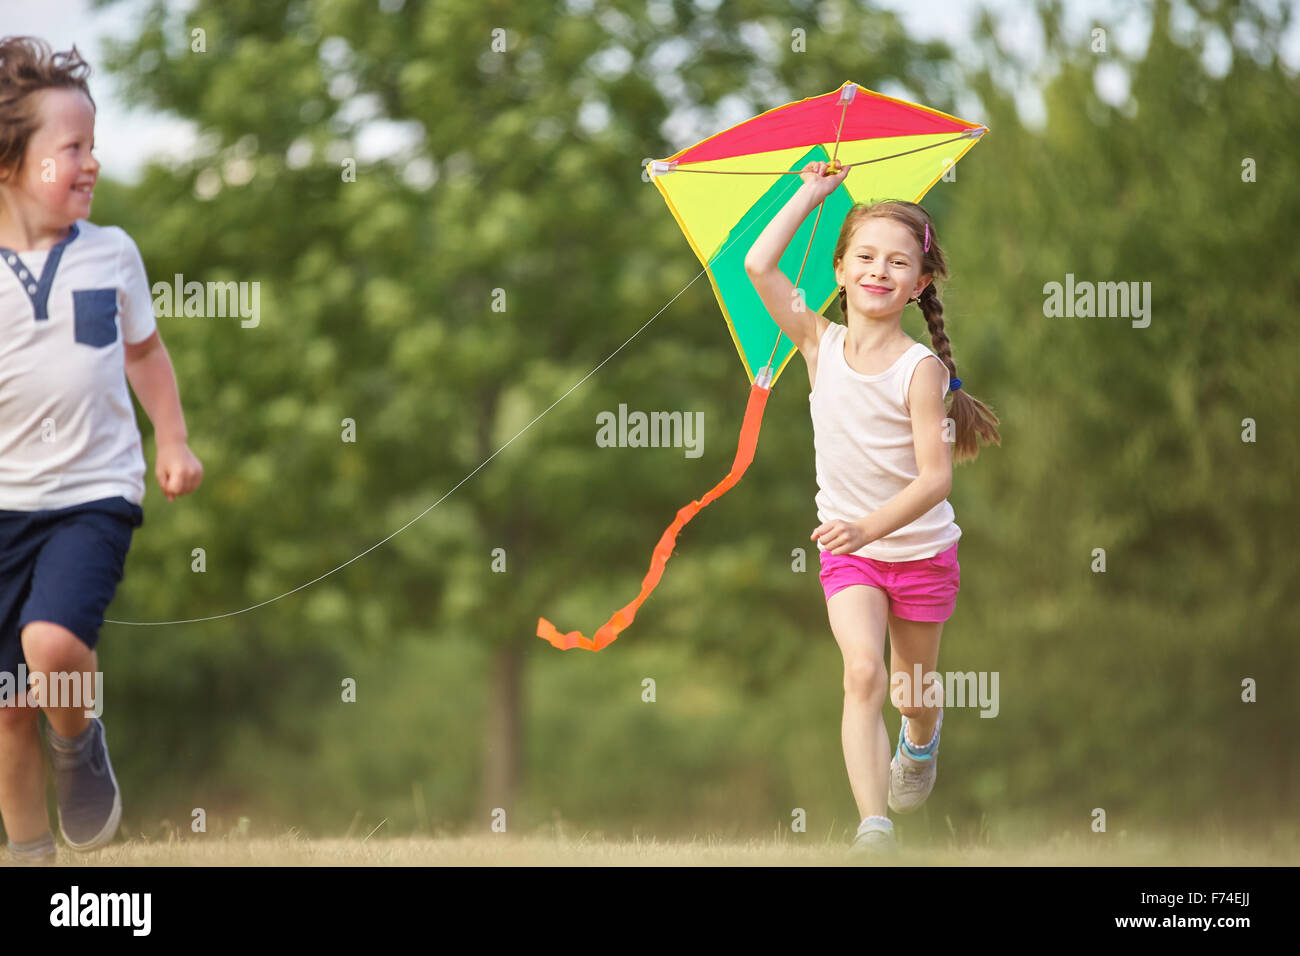 Girl and boy flying a kite and havin fun Stock Photo